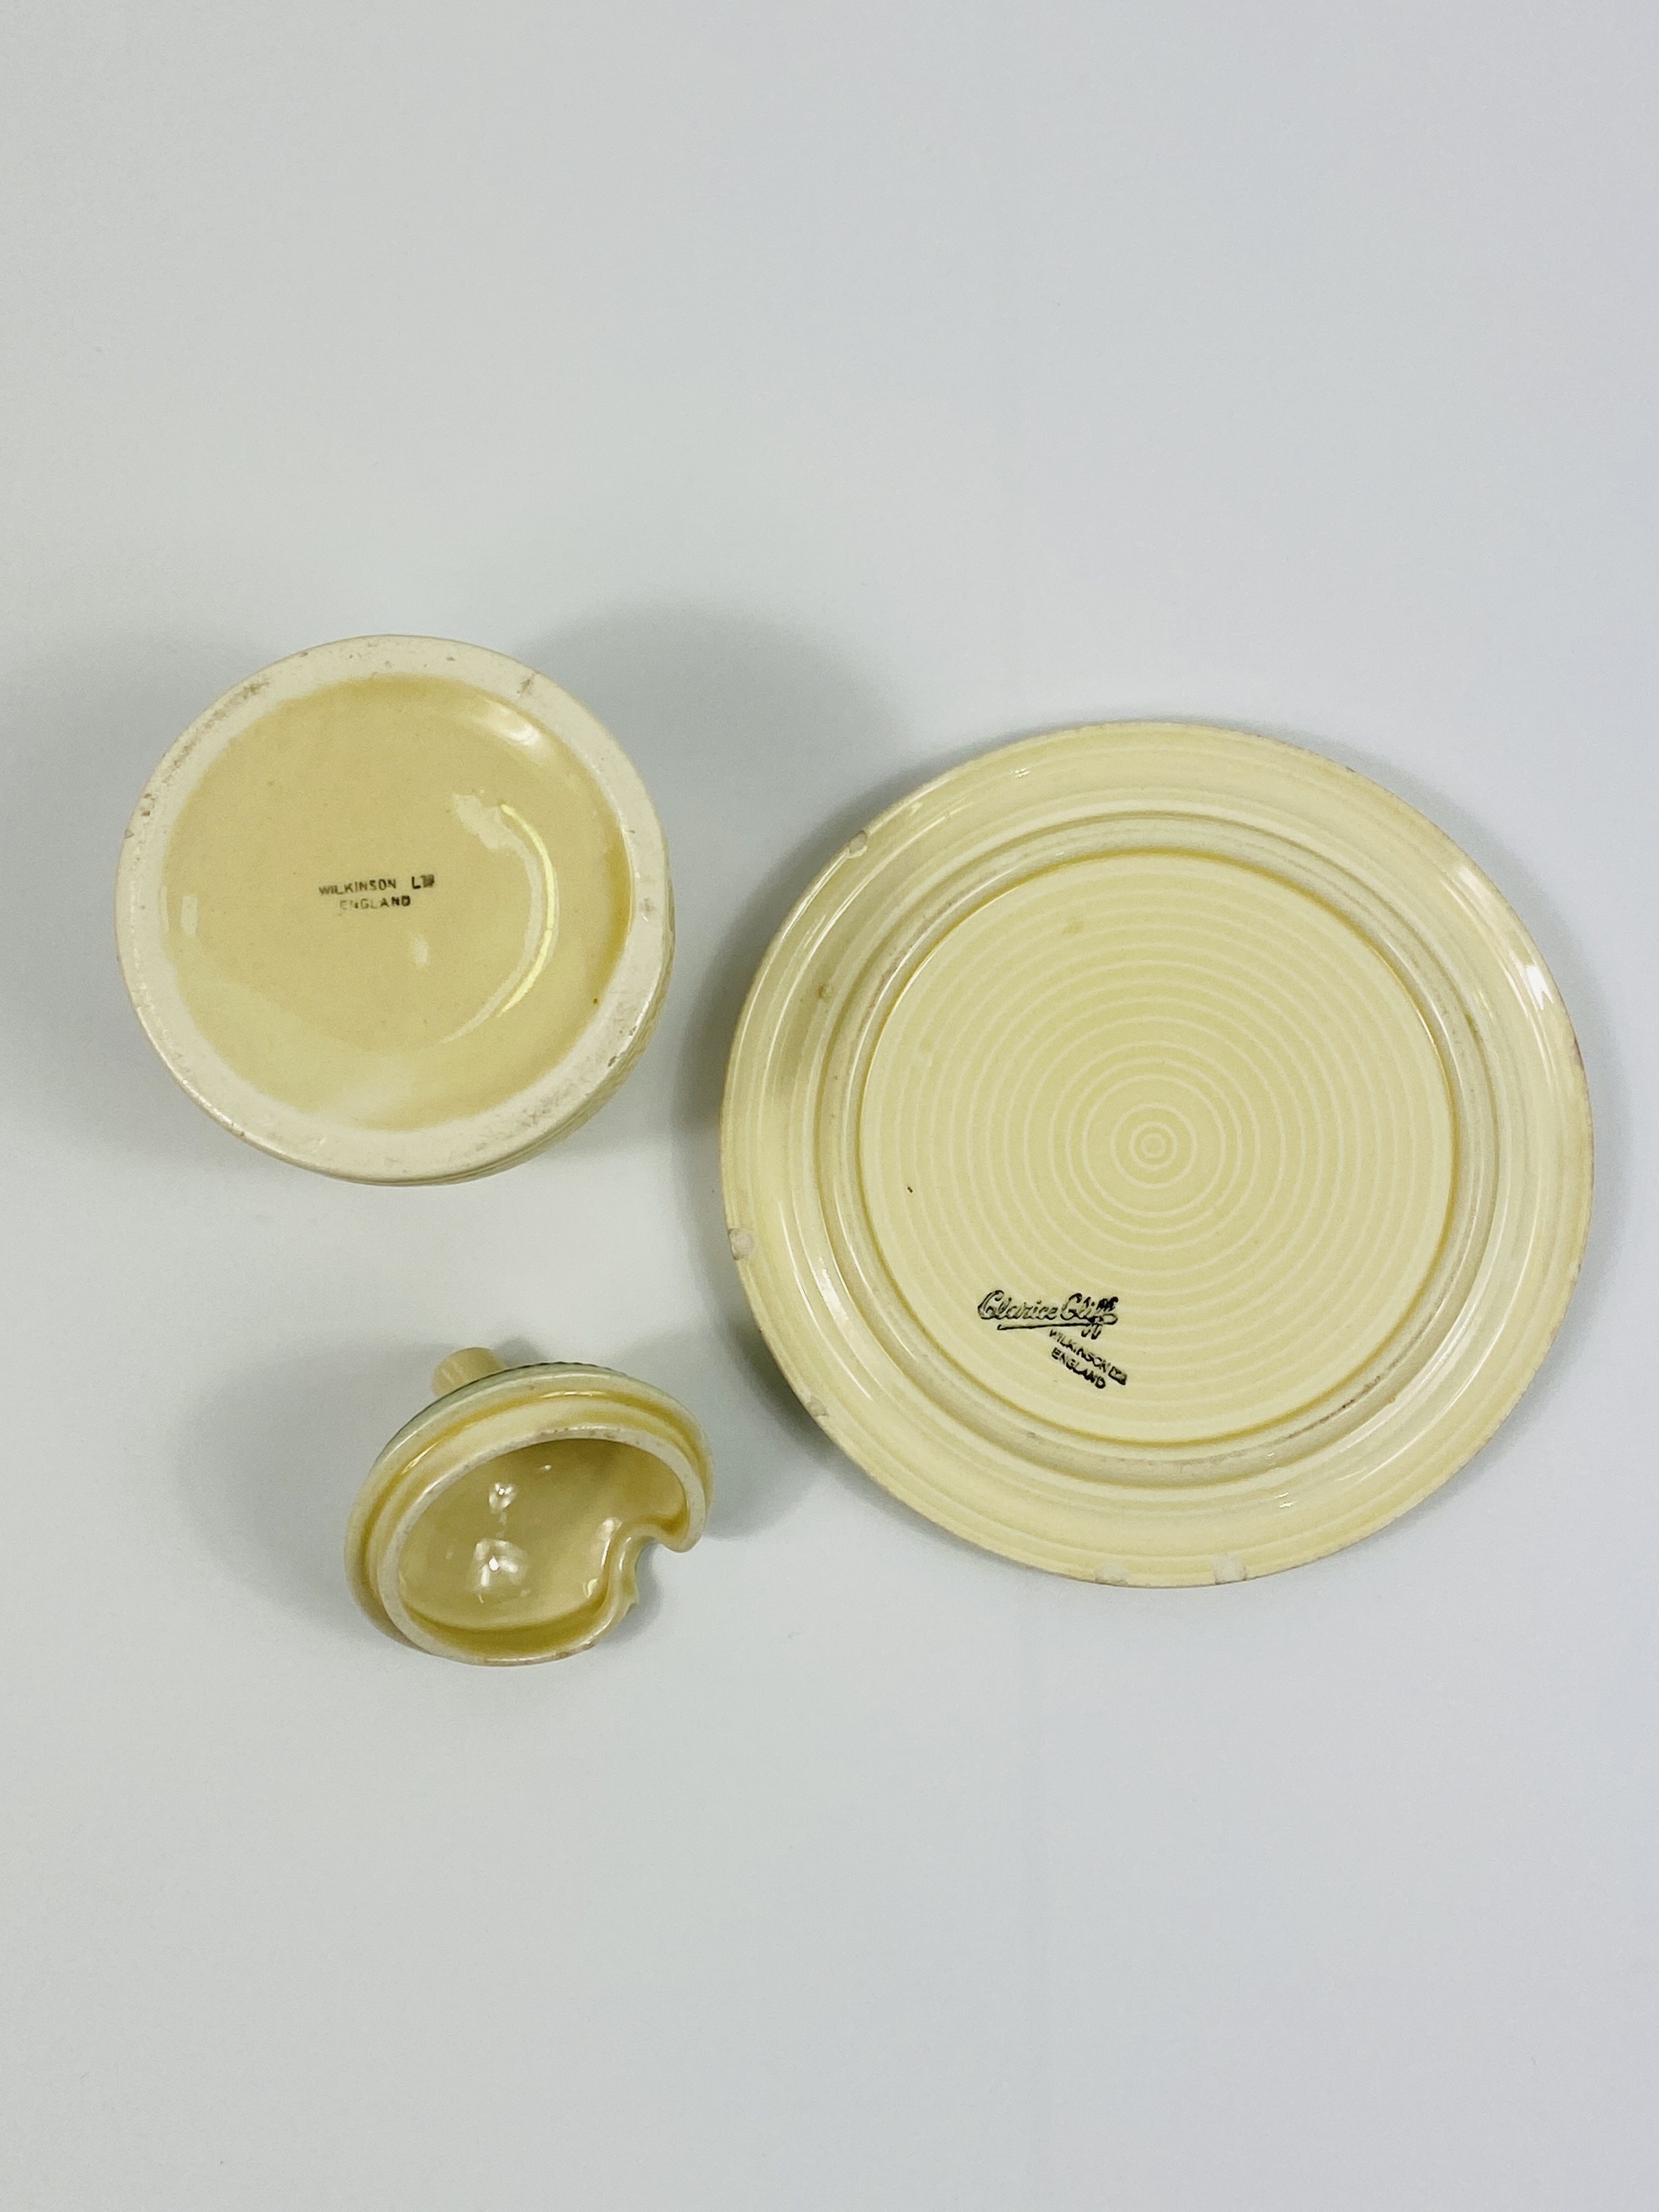 Wilkinson Lts honey pot on Clarice Cliff saucer - Image 4 of 6